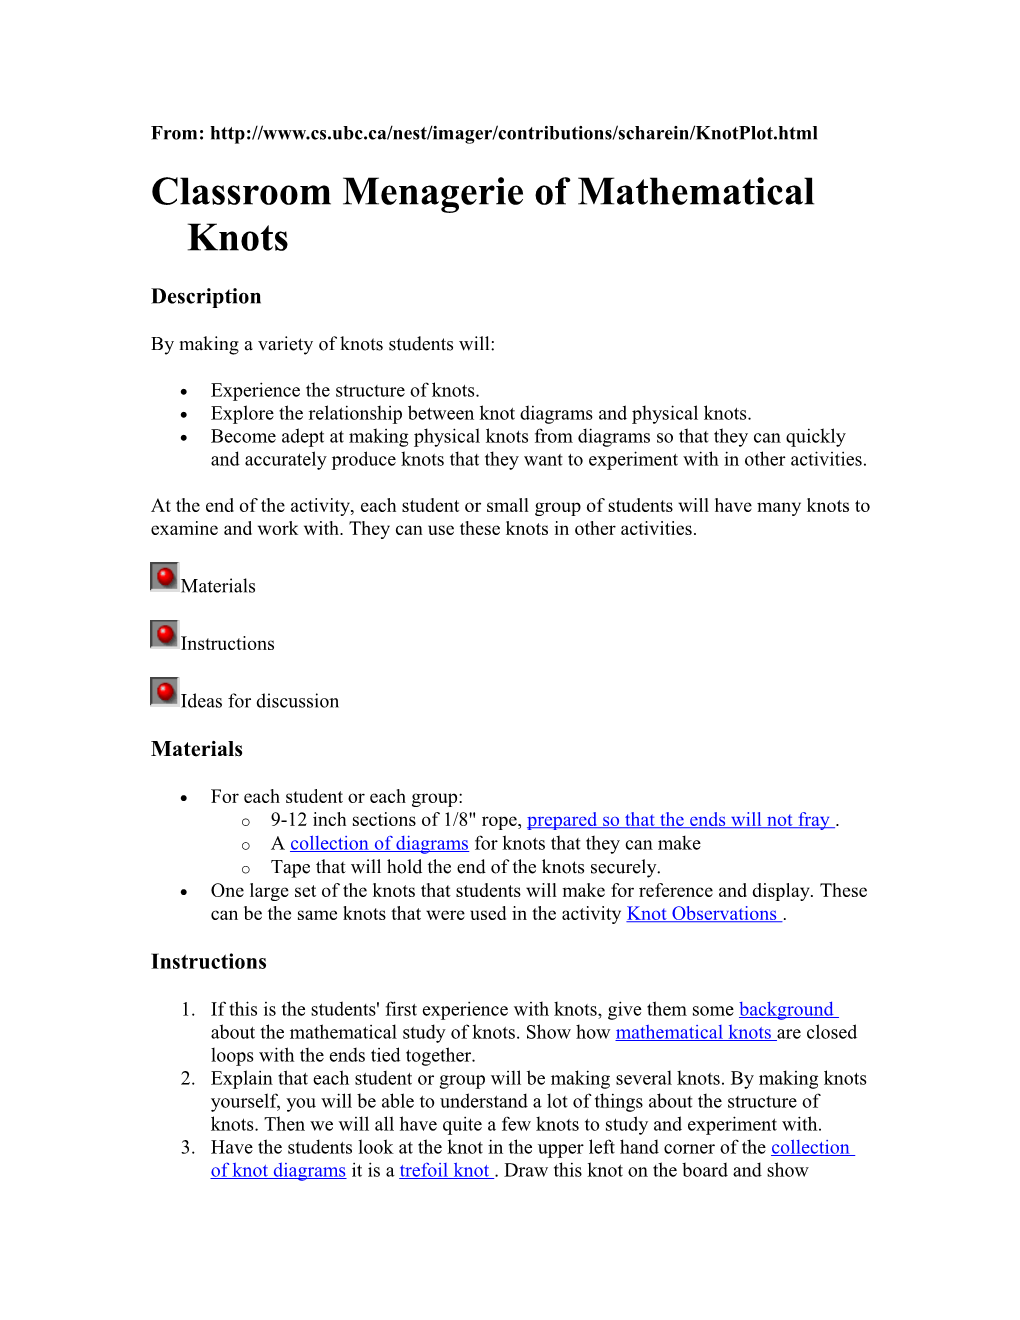 Classroom Menagerie of Mathematical Knots